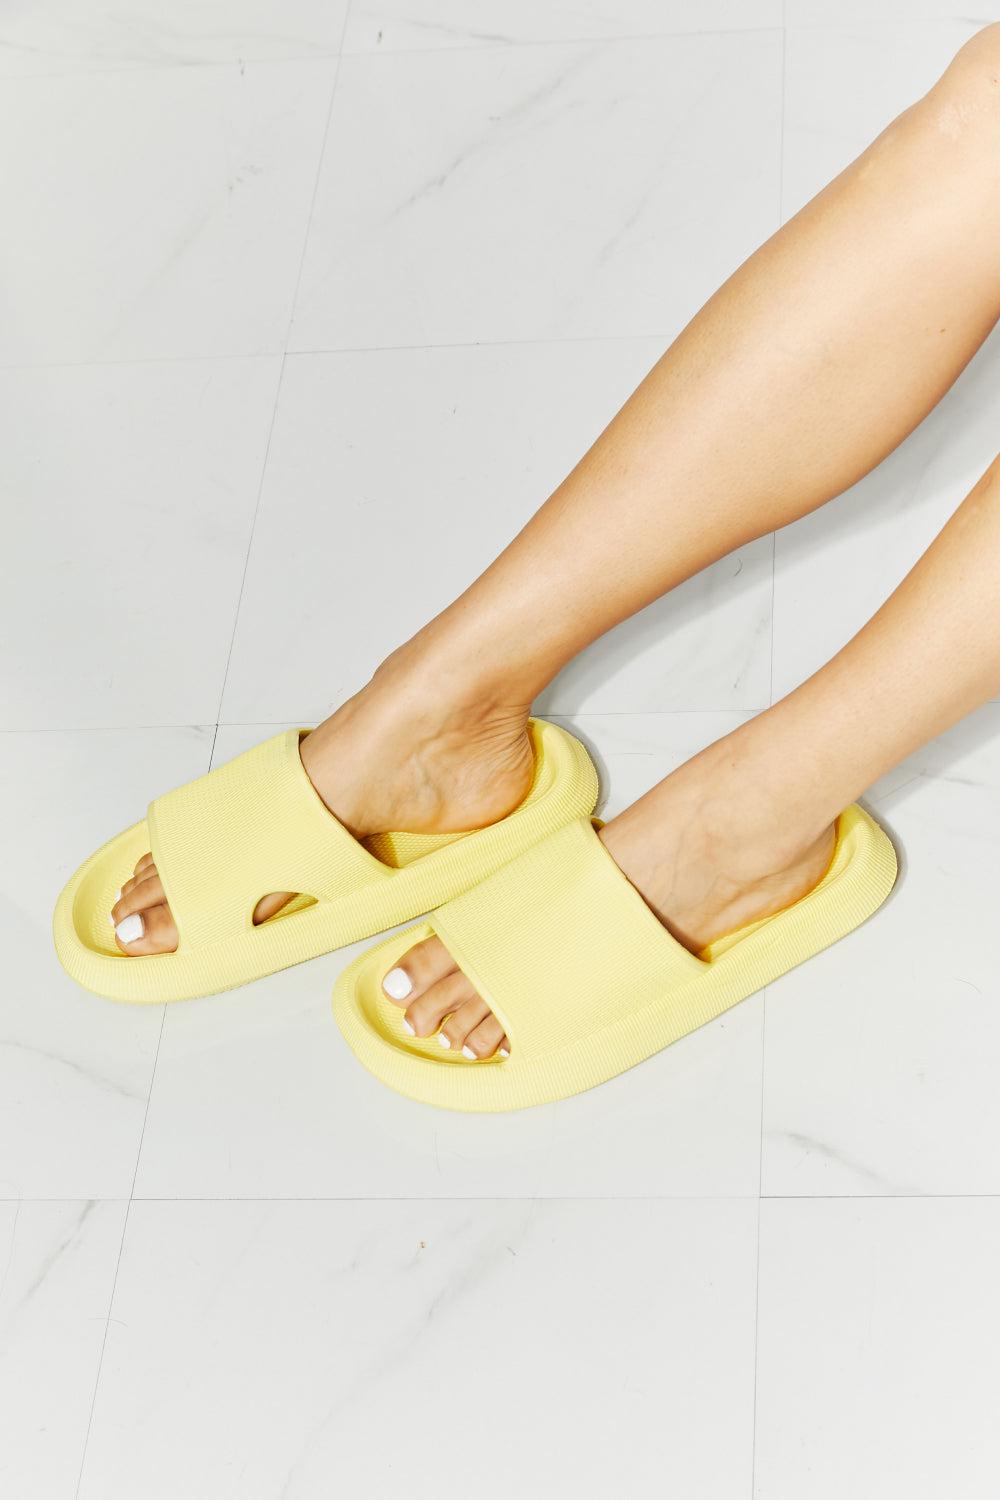 MMShoes Arms Around Me Open Toe Slide in Yellow BLUE ZONE PLANET